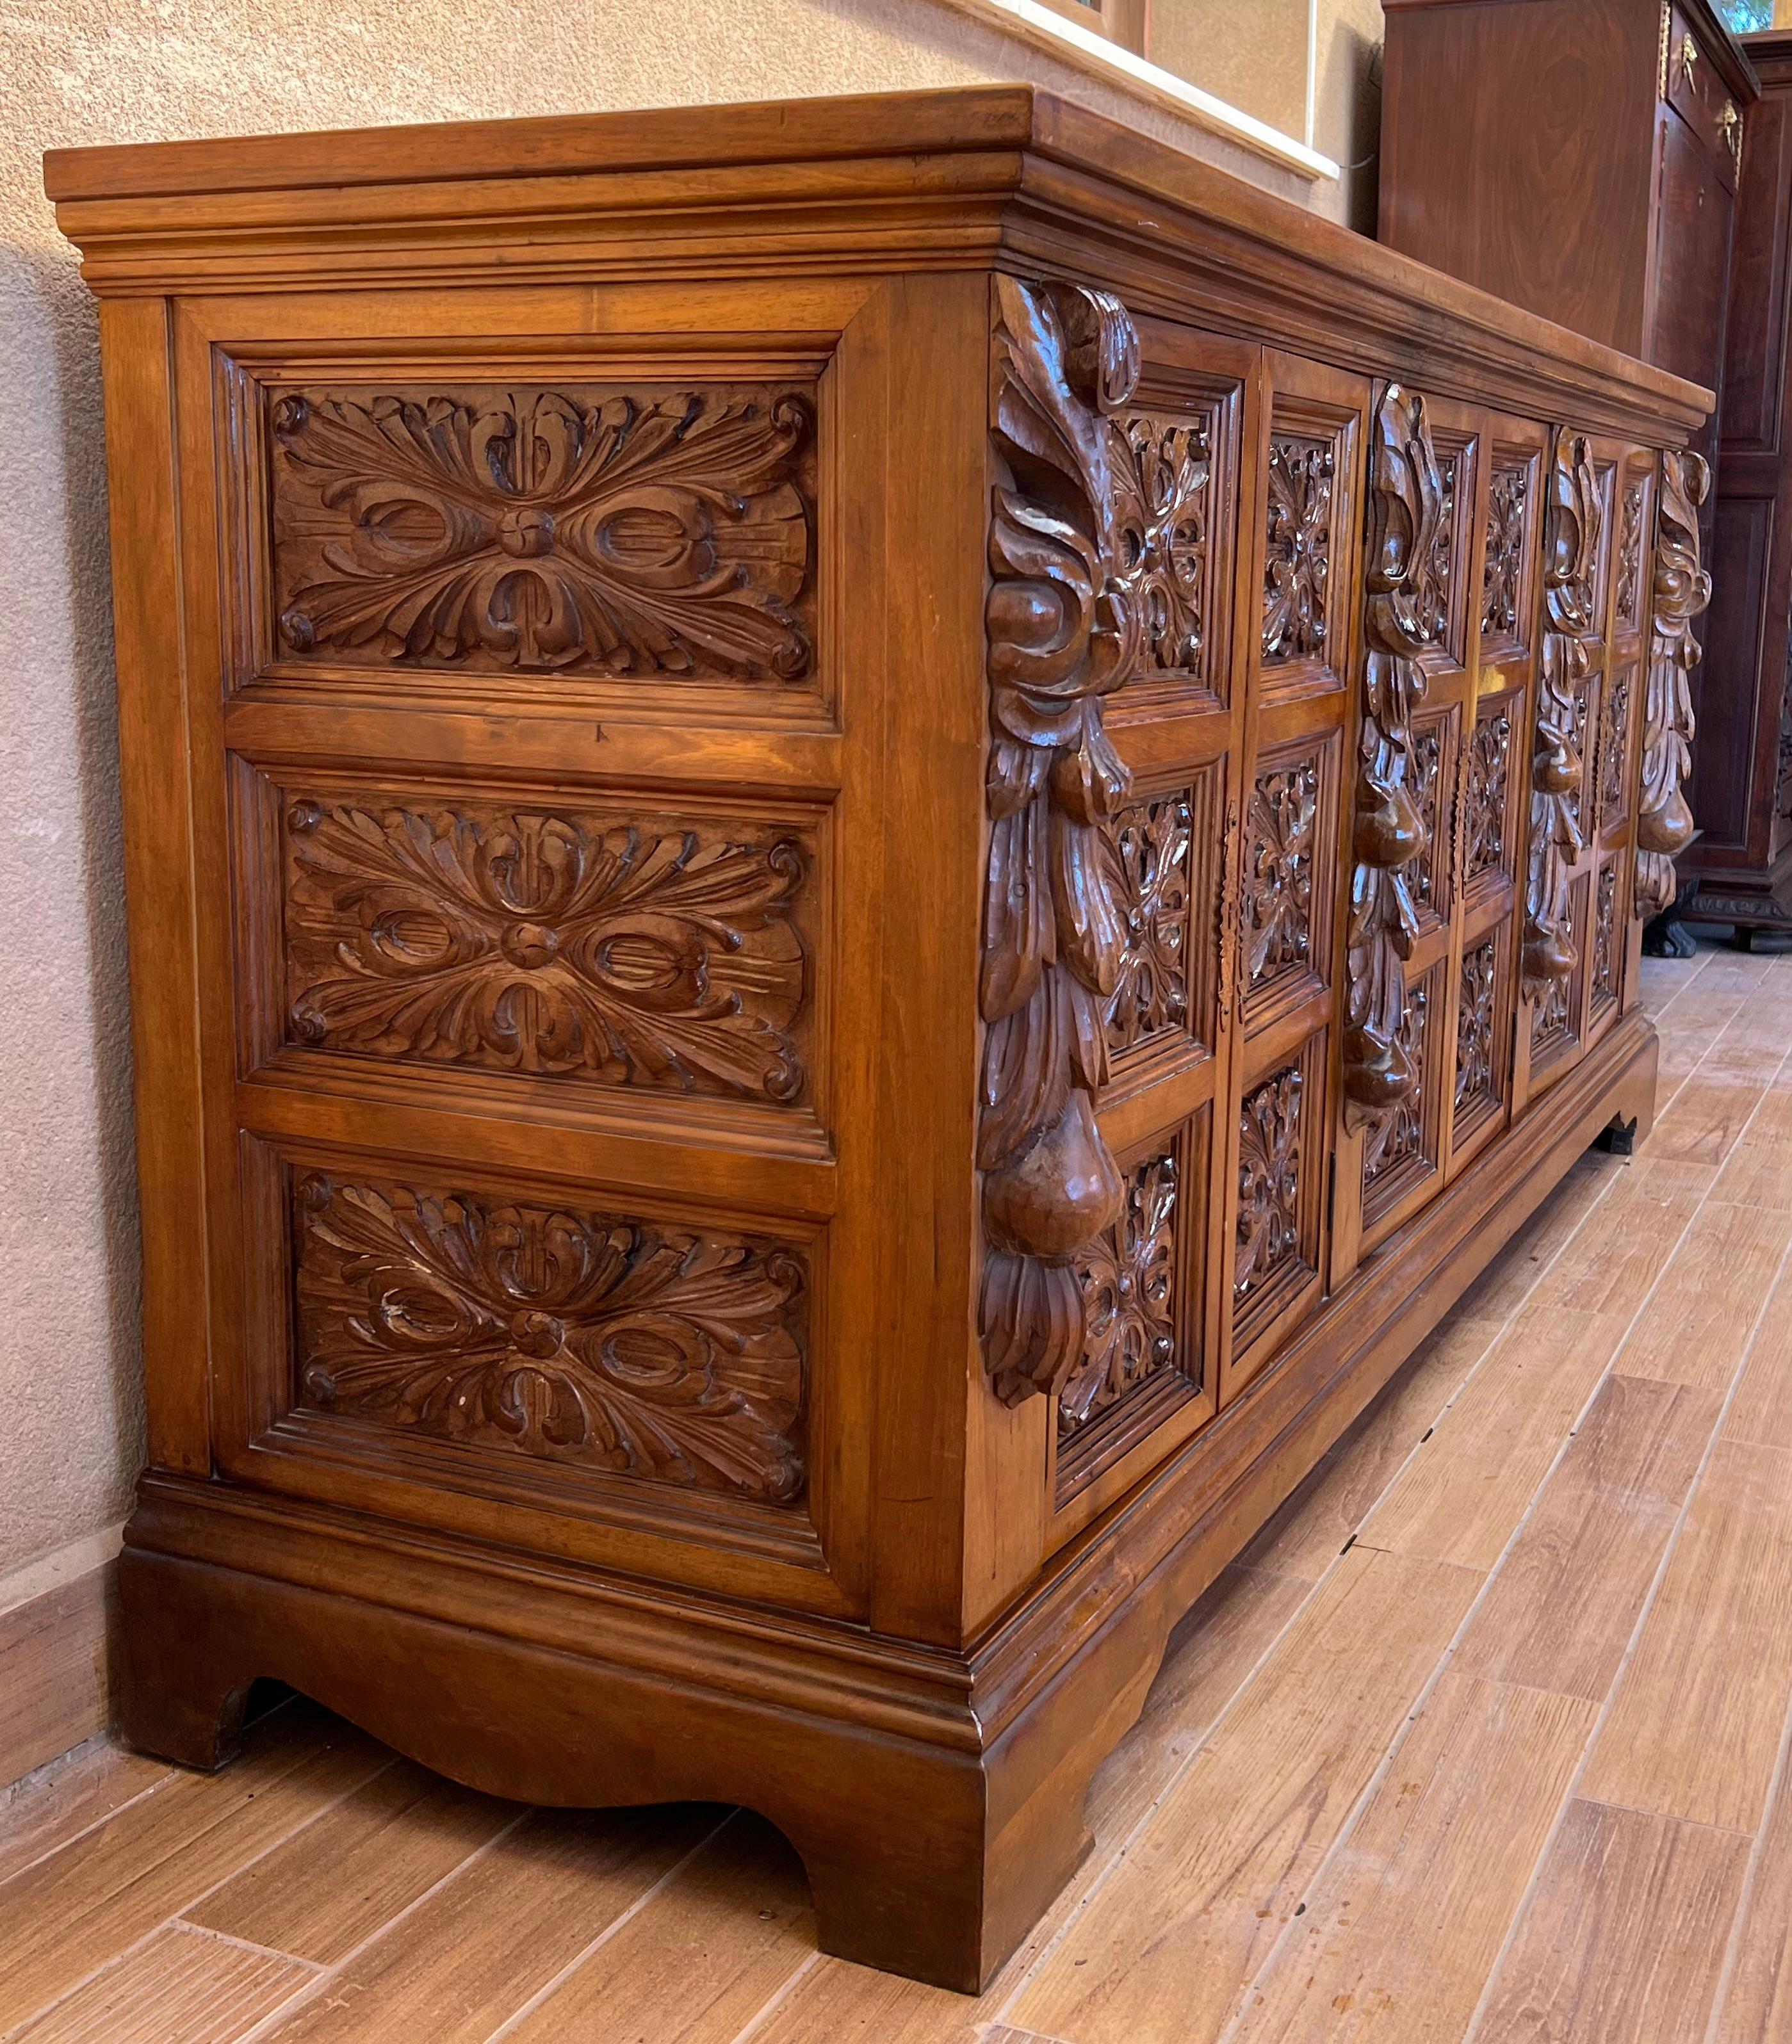 Antique Spanish Carved Walnut Sideboard with Florals Reliefs, circa 1870-1880 For Sale 4